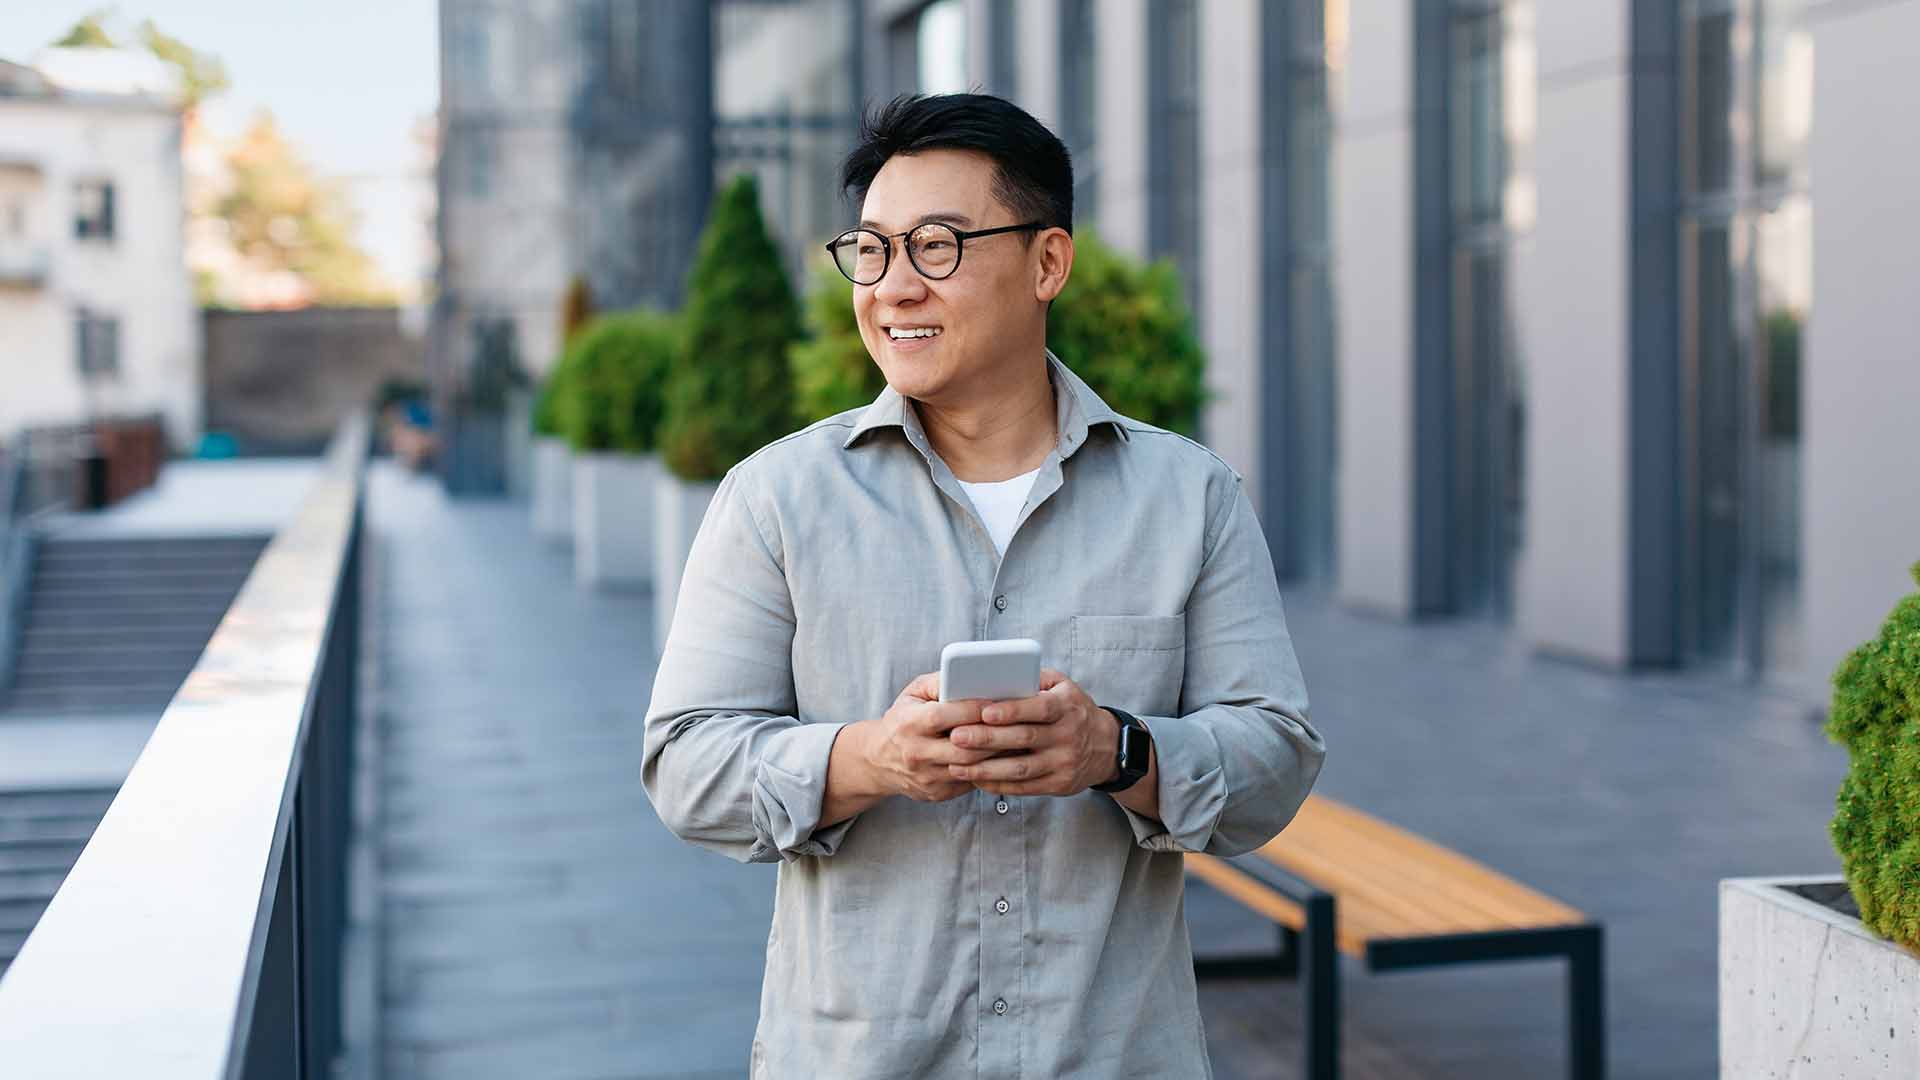 Asian man with glasses smiling while holding phone outside